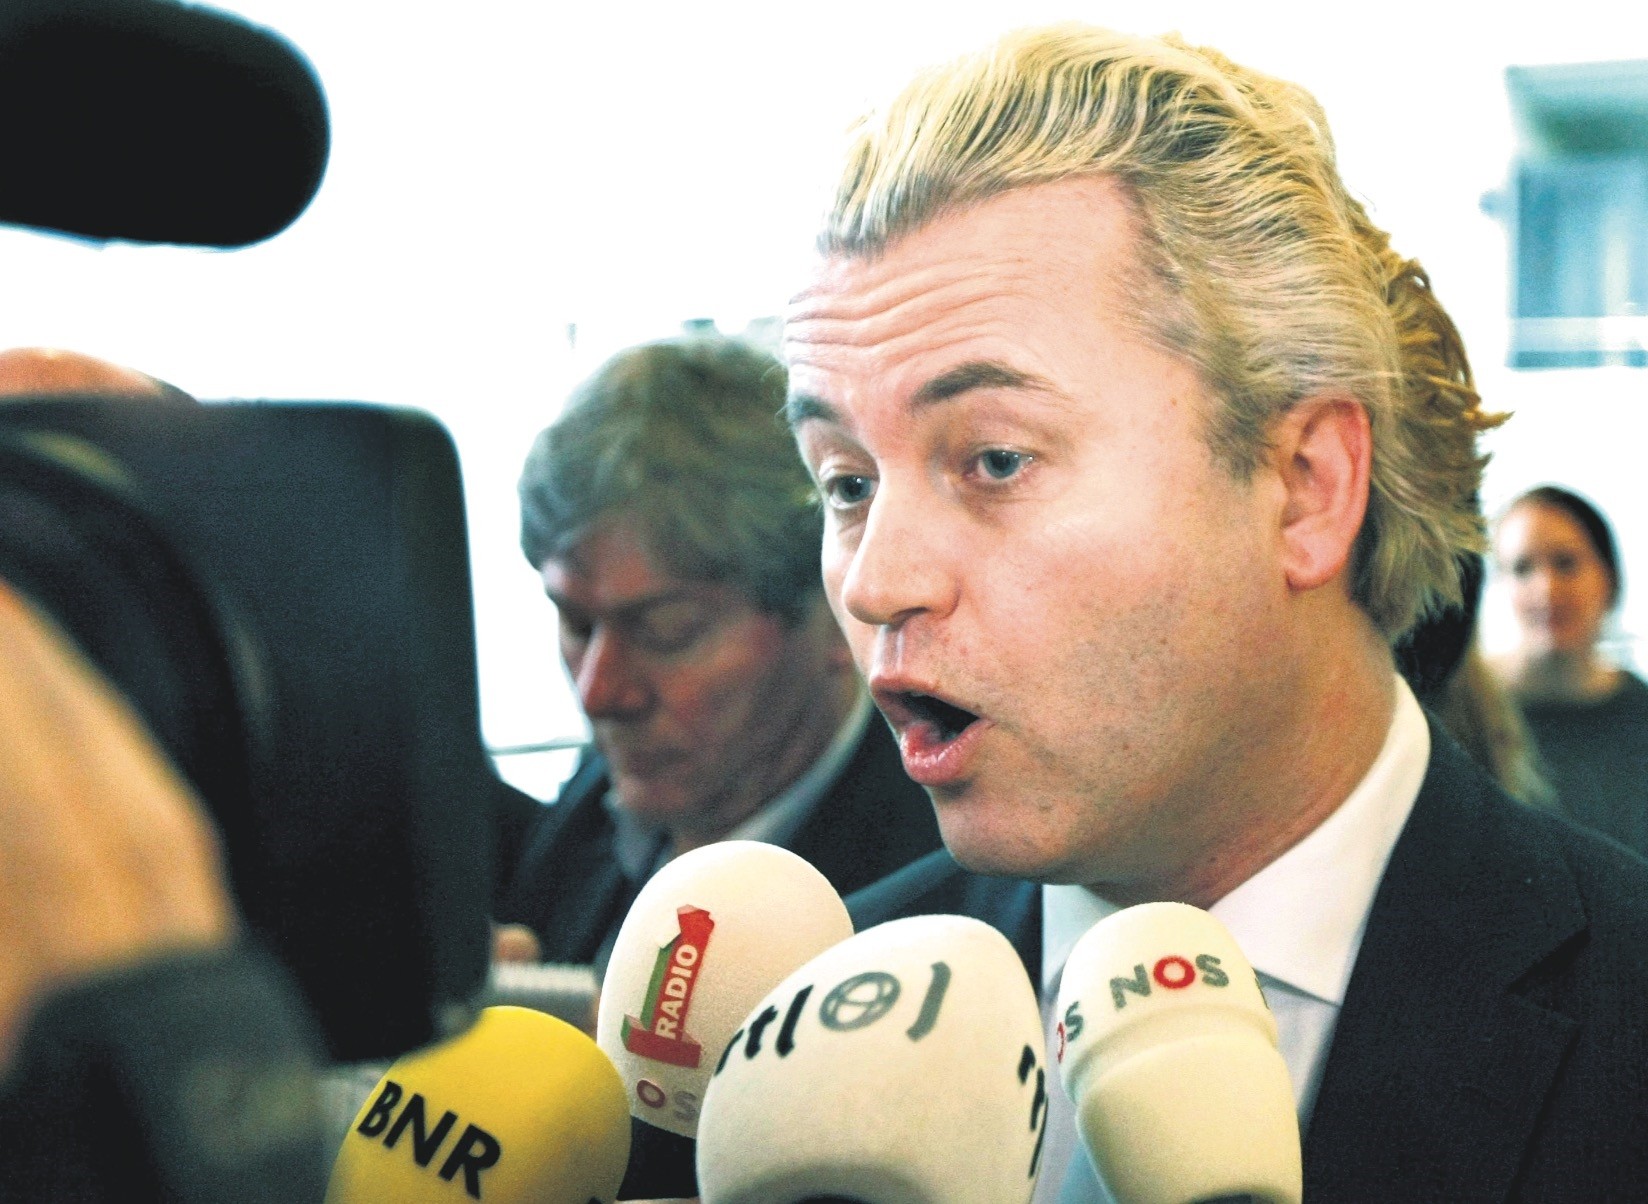 PVV leader Geert Wilders put forward a fiery platform in the country's 2017 general elections, vowing to close mosques, ban sales of the Quran and halt the immigration of Muslim refugees.